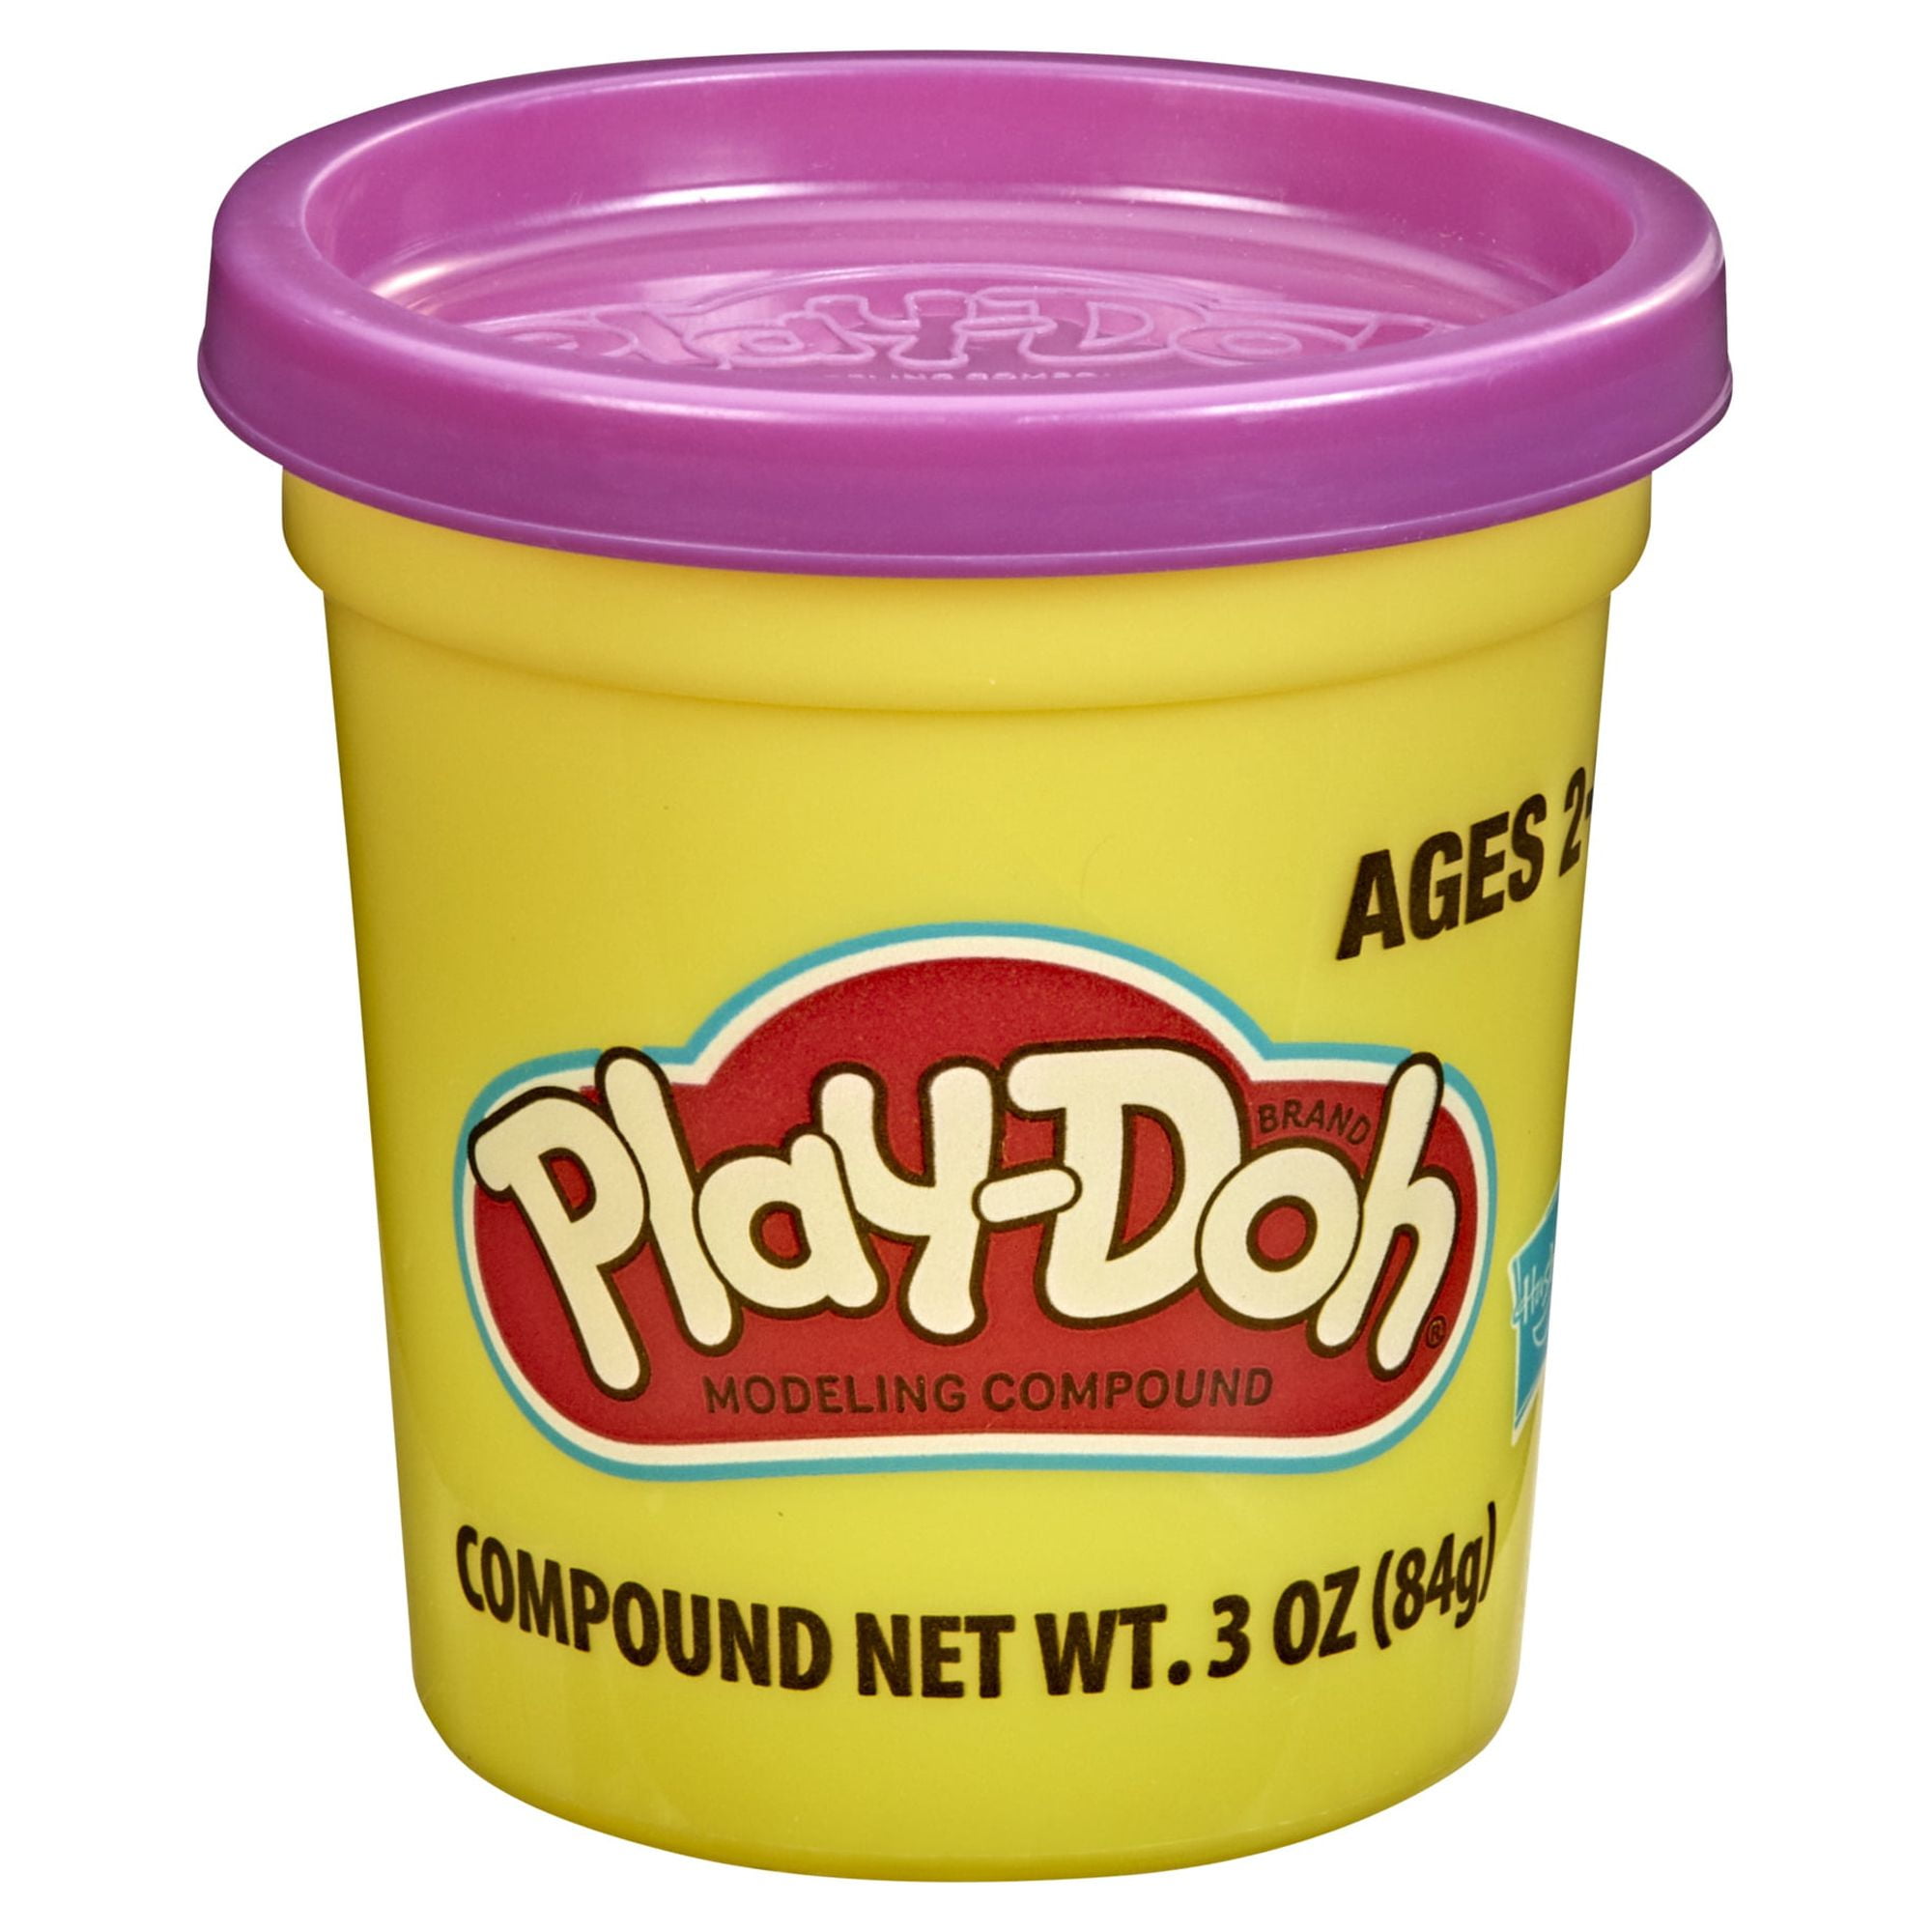 Play-Doh Modeling Compound Play Dough Can - Dark Green (3 oz)